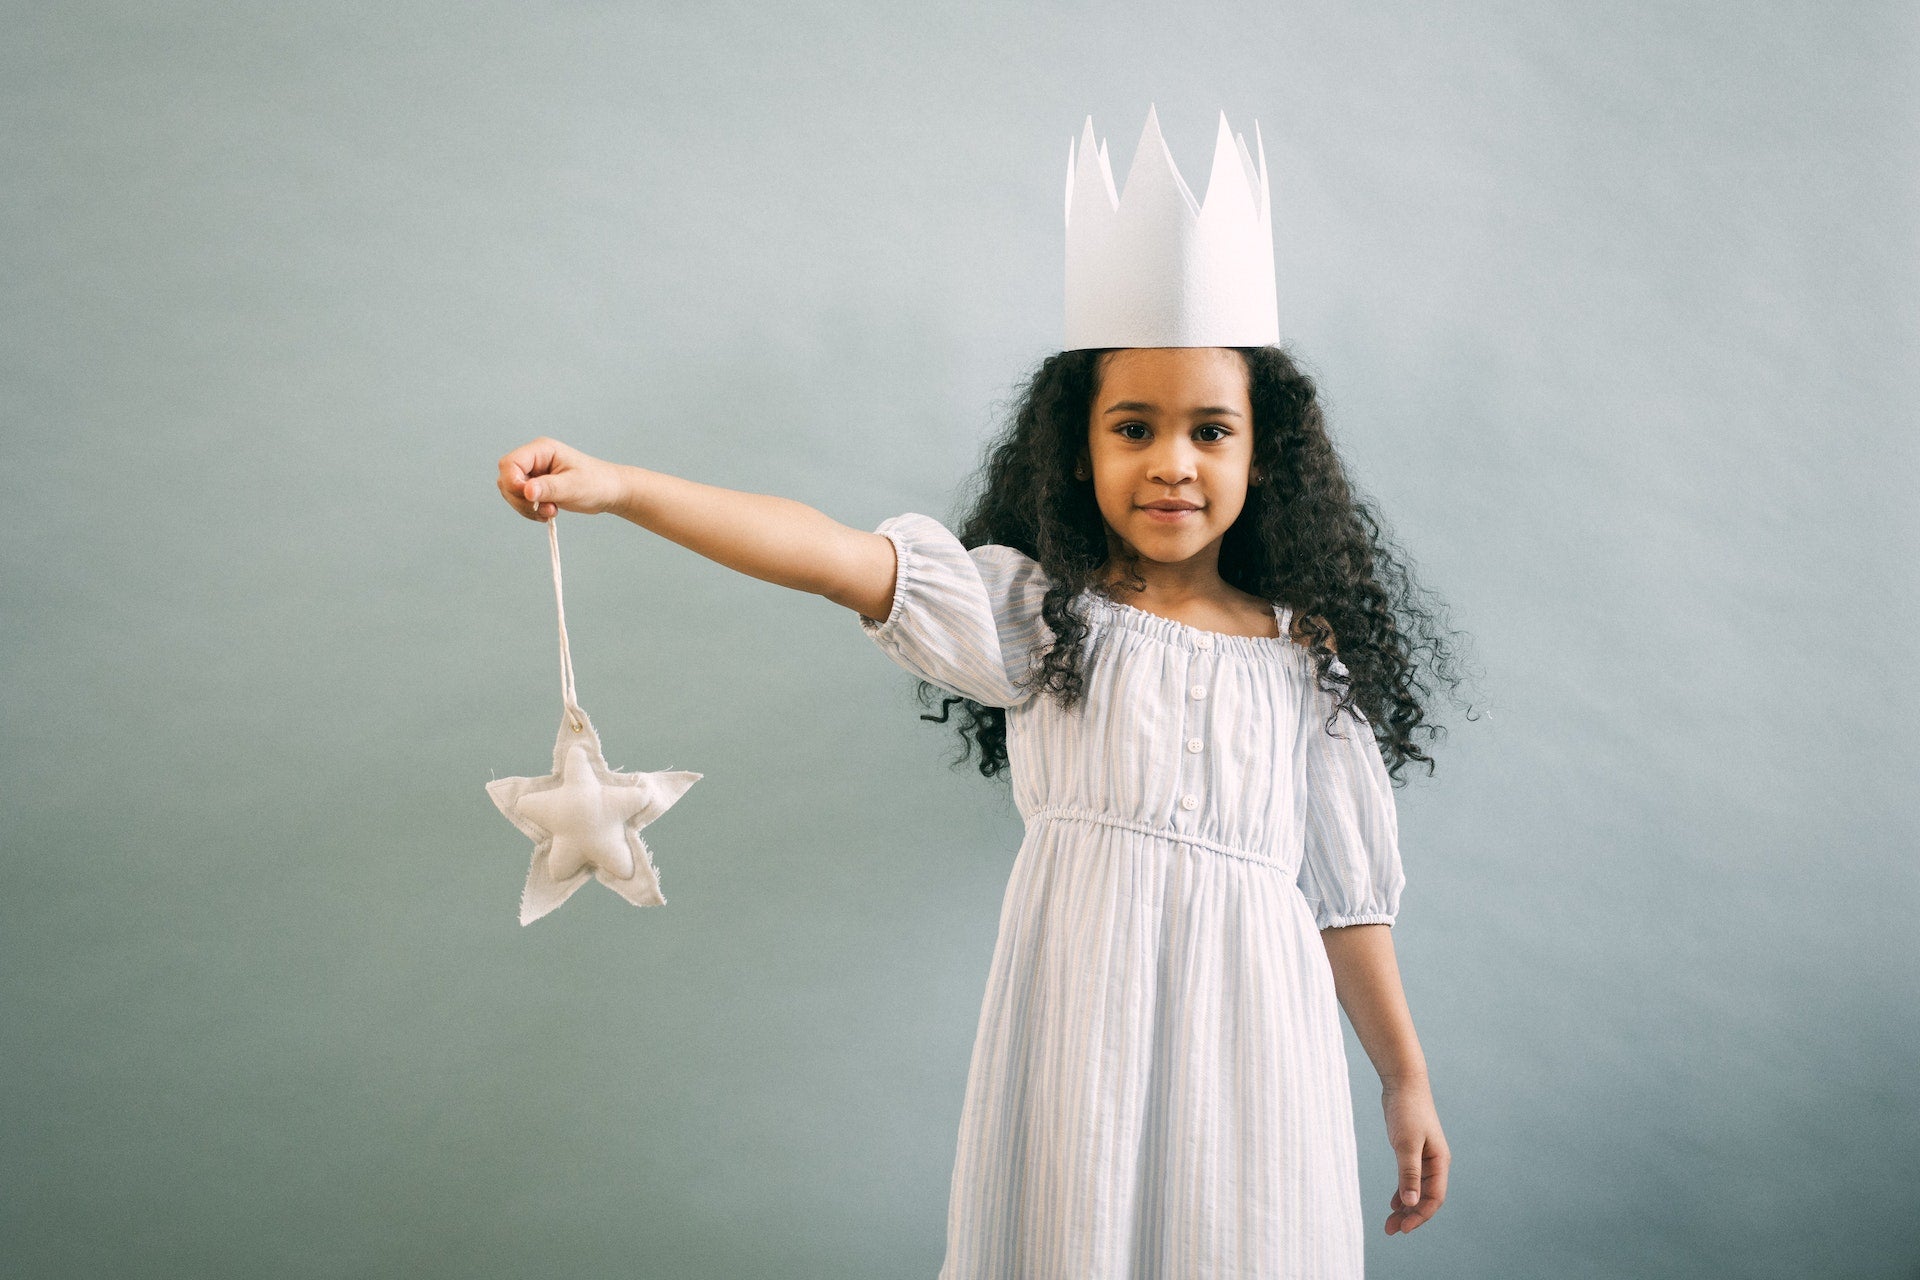 A cute little girl in a white costume with a paper crown on her head holding a white star on a string.